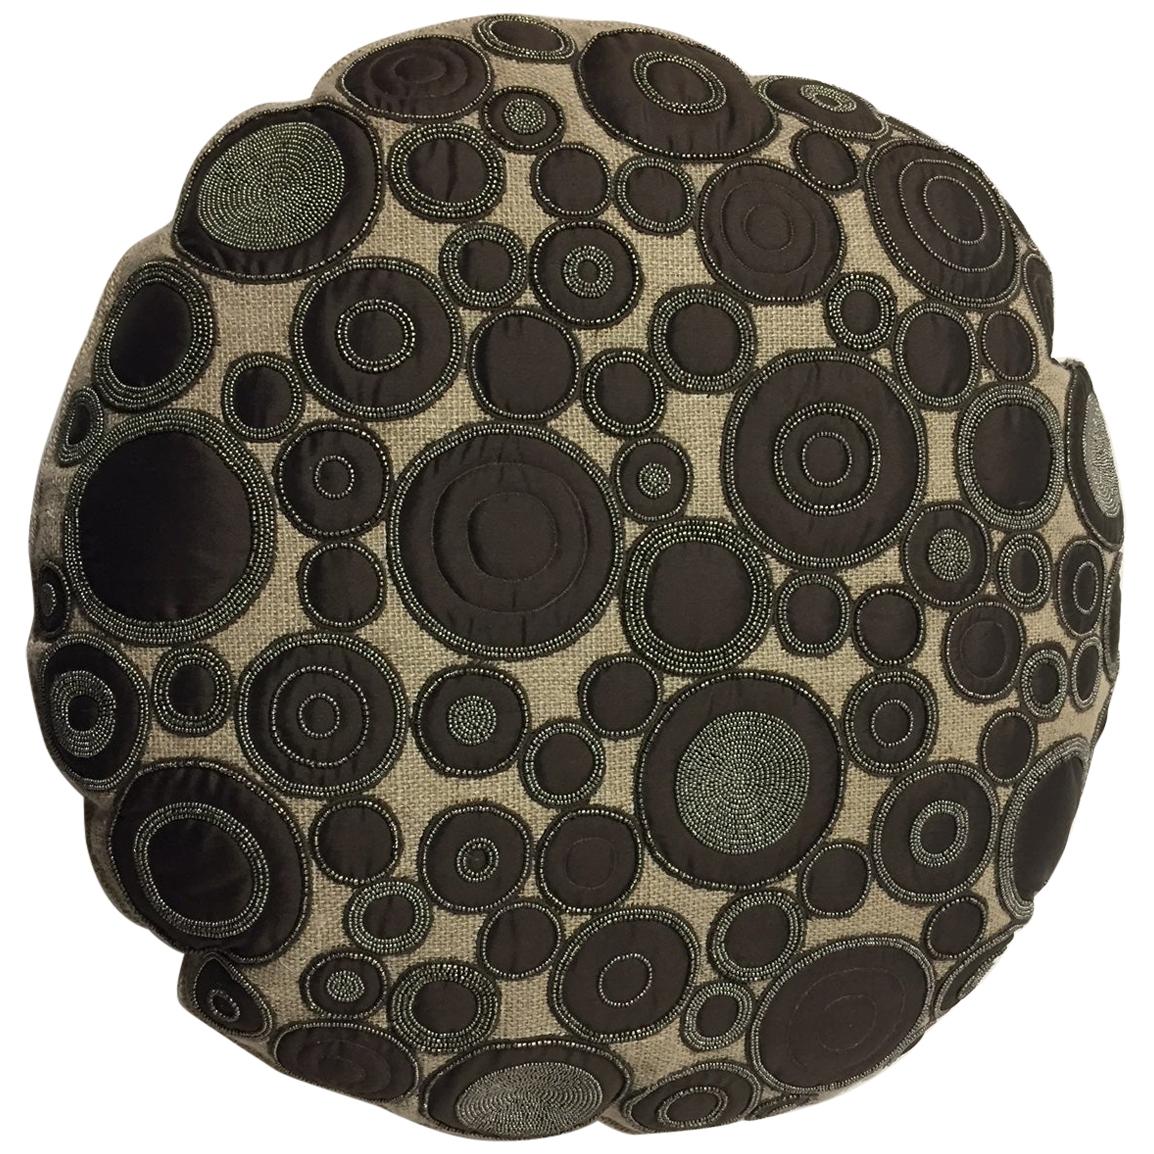 Decorative Linen Cushion Round Shaped with Brown Silk Appliqué Work and Beading